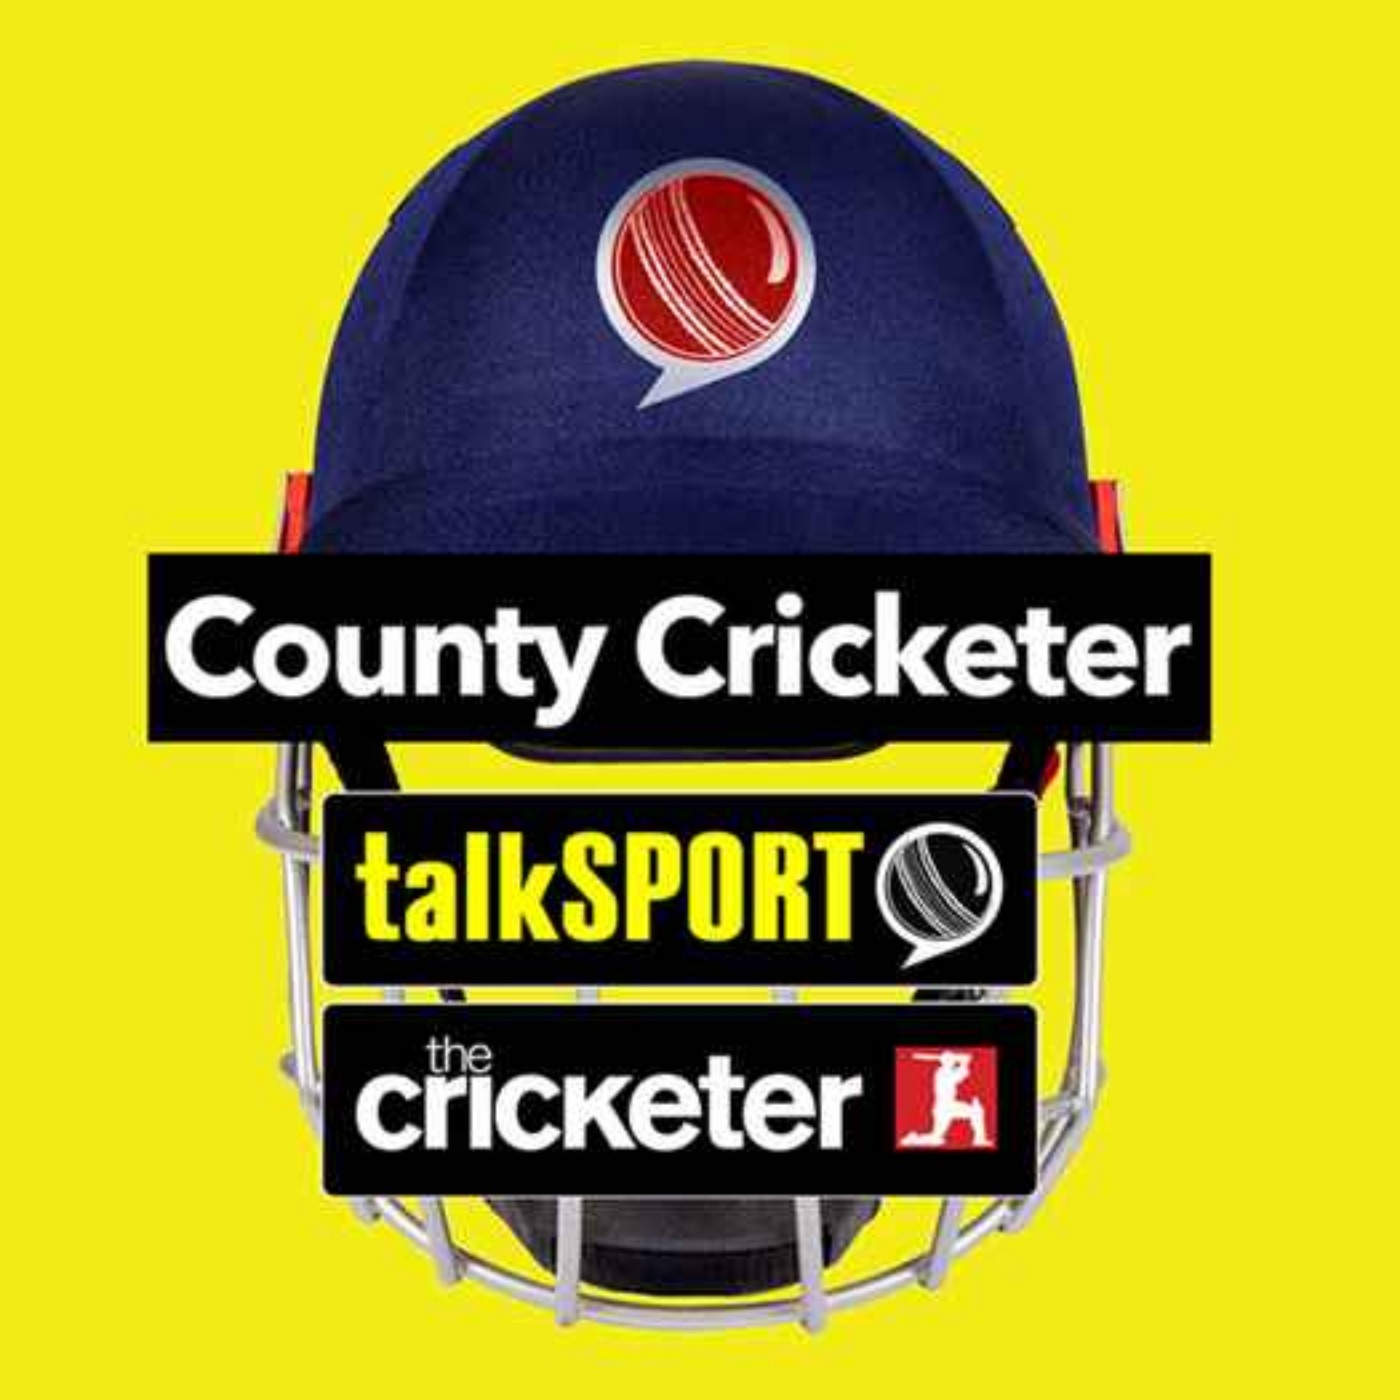 Following On: County Cricketer S2 EP17: Will Rajasthan Royals Take Over Yorkshire; Durham's Promotion & Changes To The Hundred?